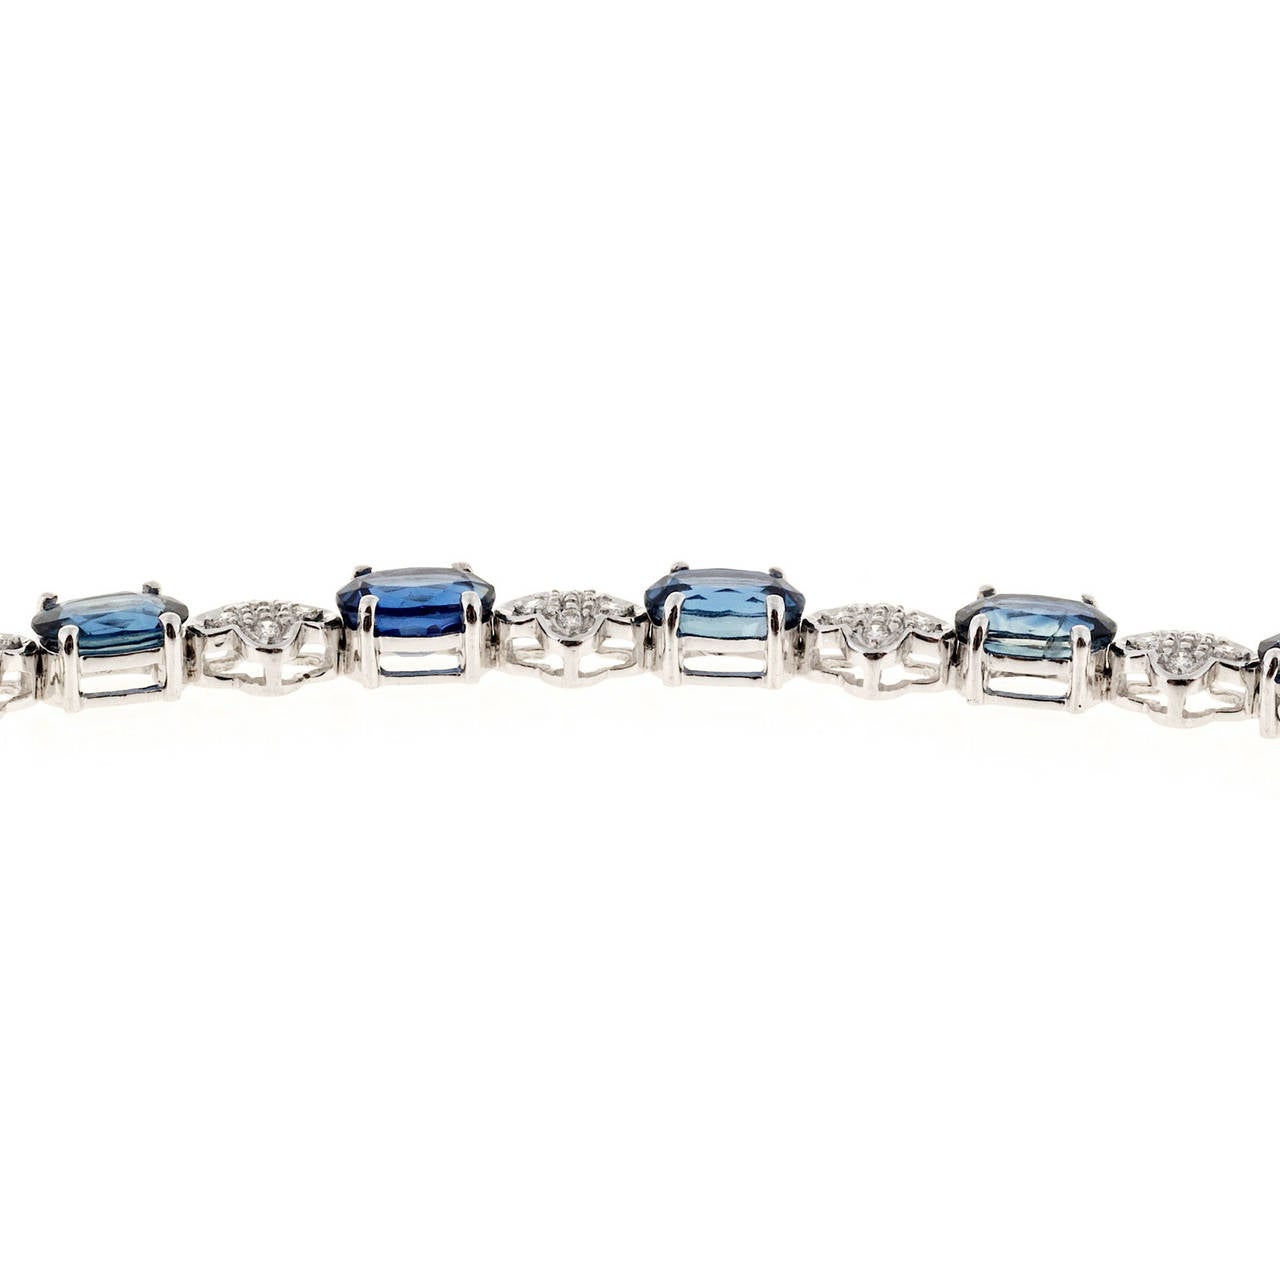 Very nice 9.03ct oval bright blue Sapphire bracelet with 4 full cut diamonds between each Sapphire. Built in catch with underside safety.

15 oval bright medium blue Sapphires, approx. total weight 9.00cts, SI1, 6.14 x 4.24 x 3.00mm
60 round